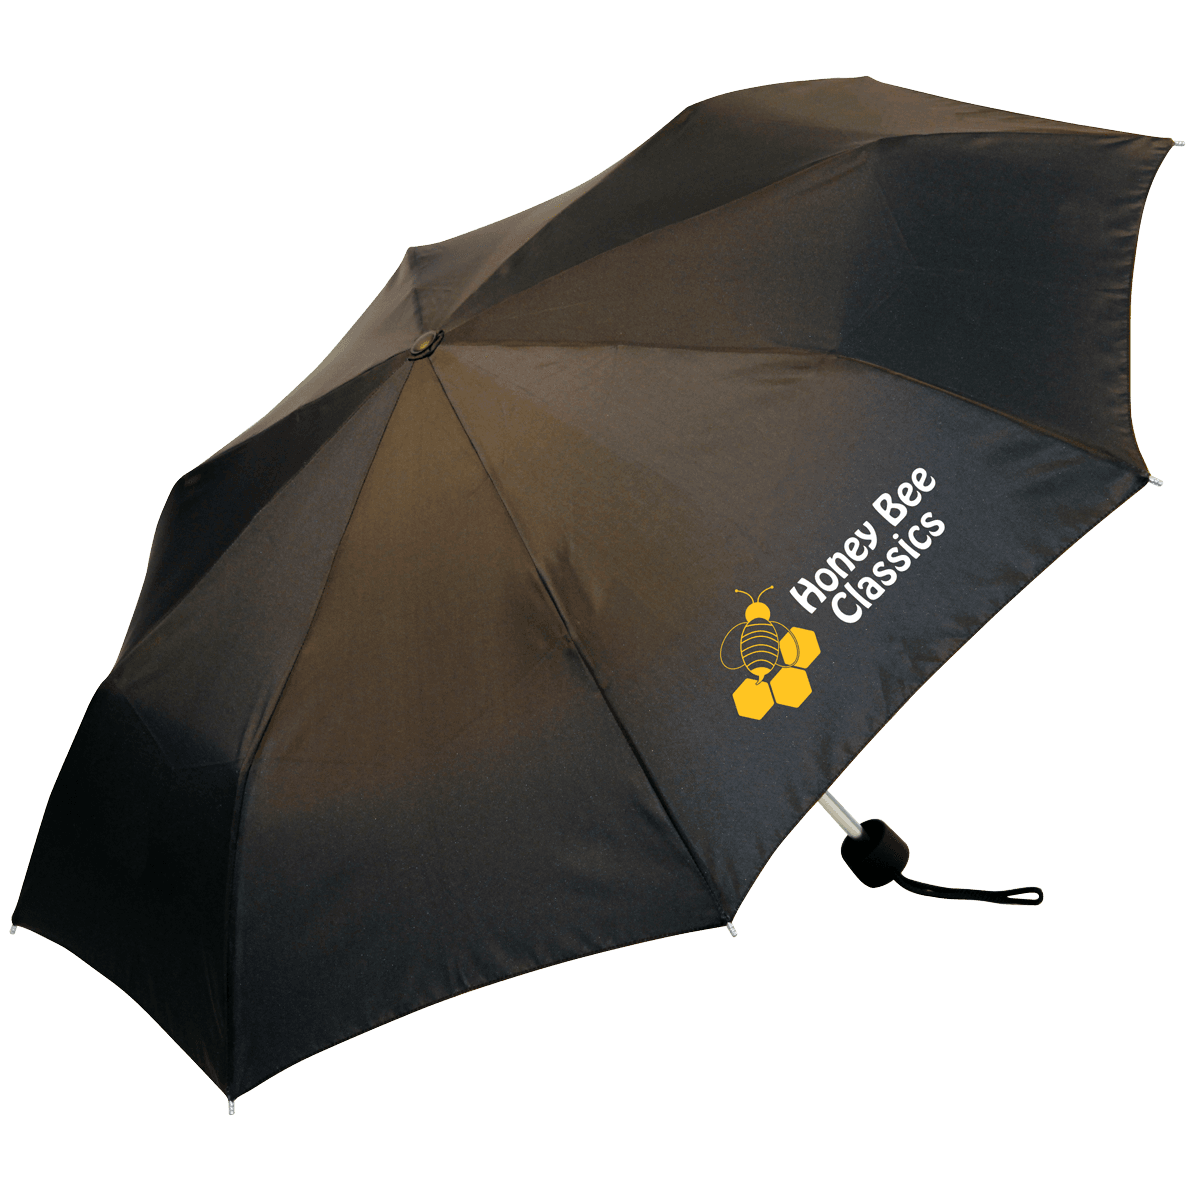 Promo-Light Stock Umbrella - The Luxury Promotional Gifts Company Limited